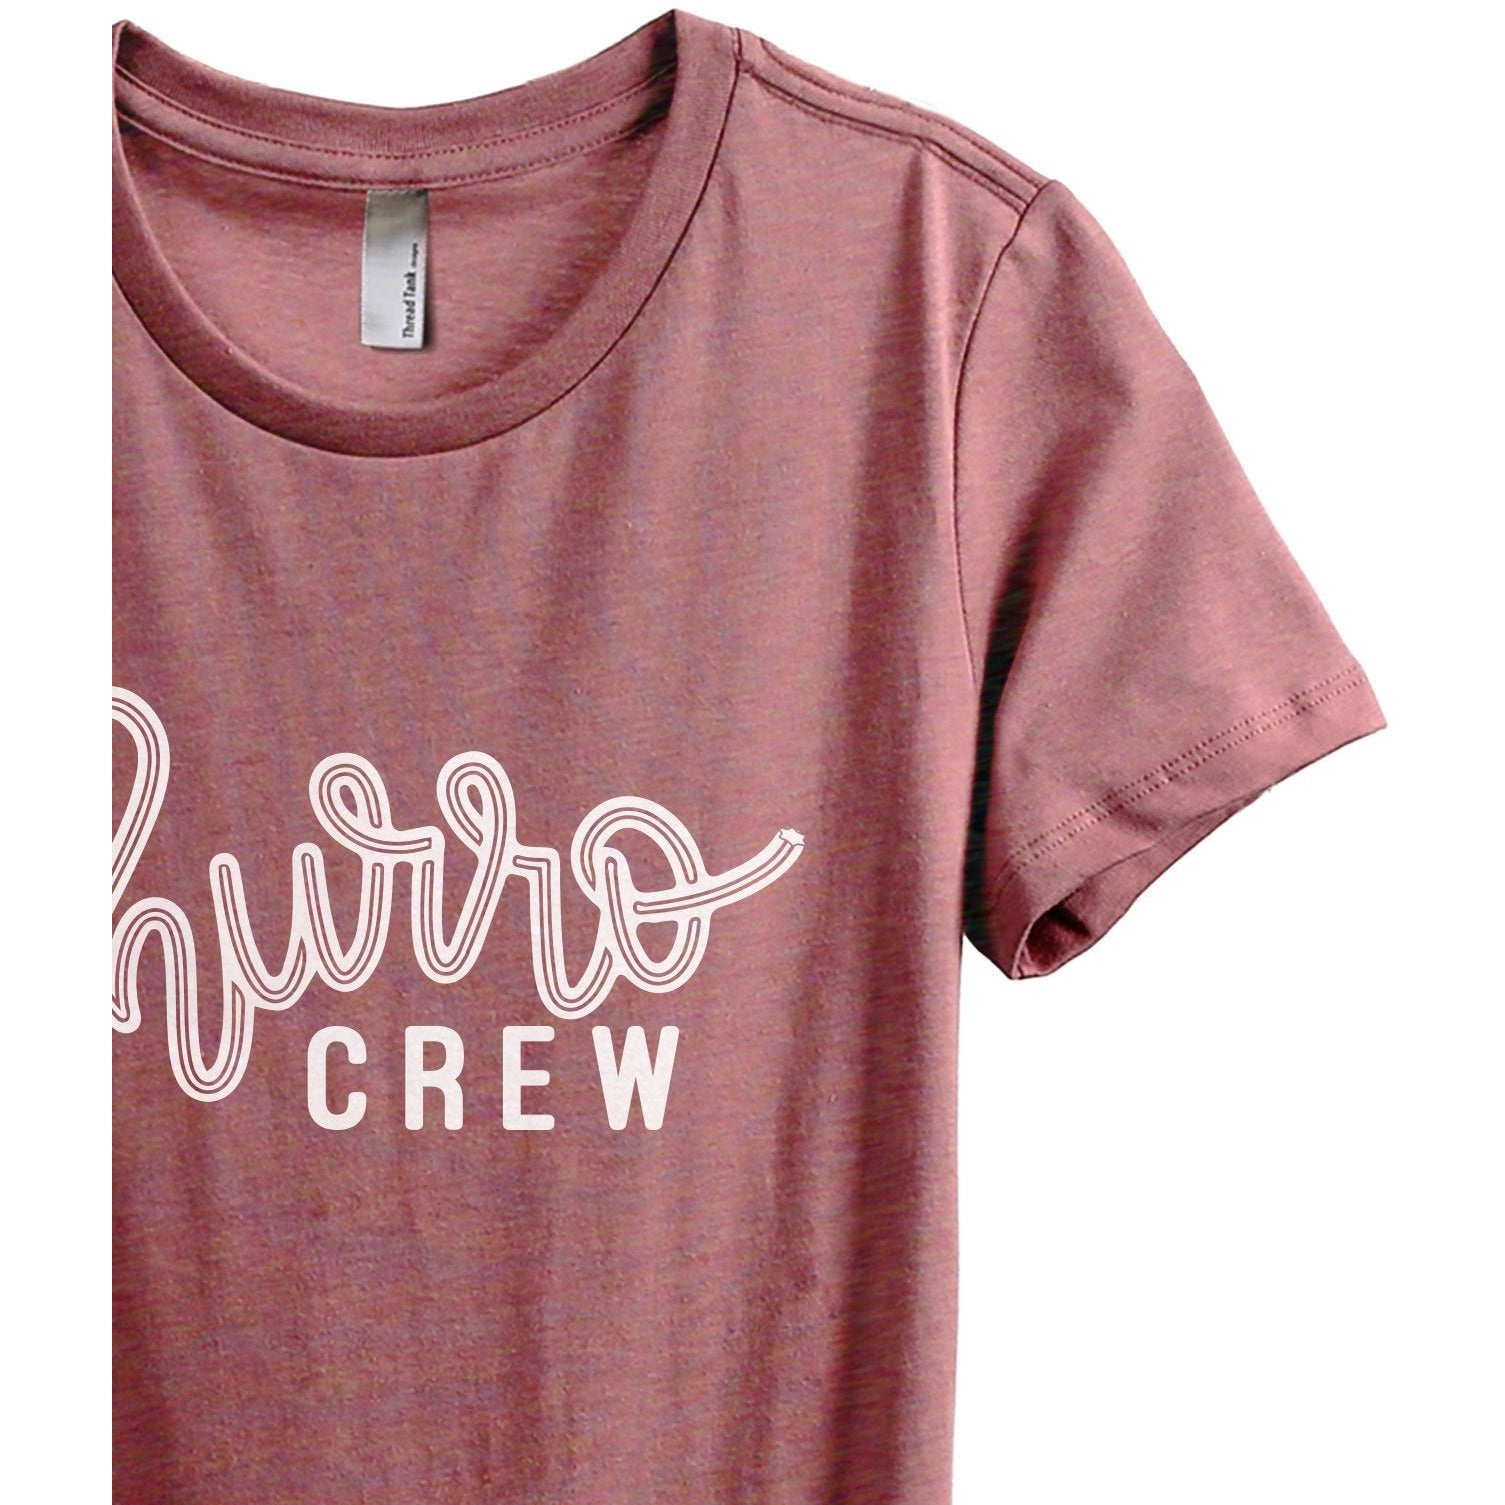 Churro Crew Women's Relaxed Crewneck T-Shirt Top Tee Heather Rouge Zoom Details
